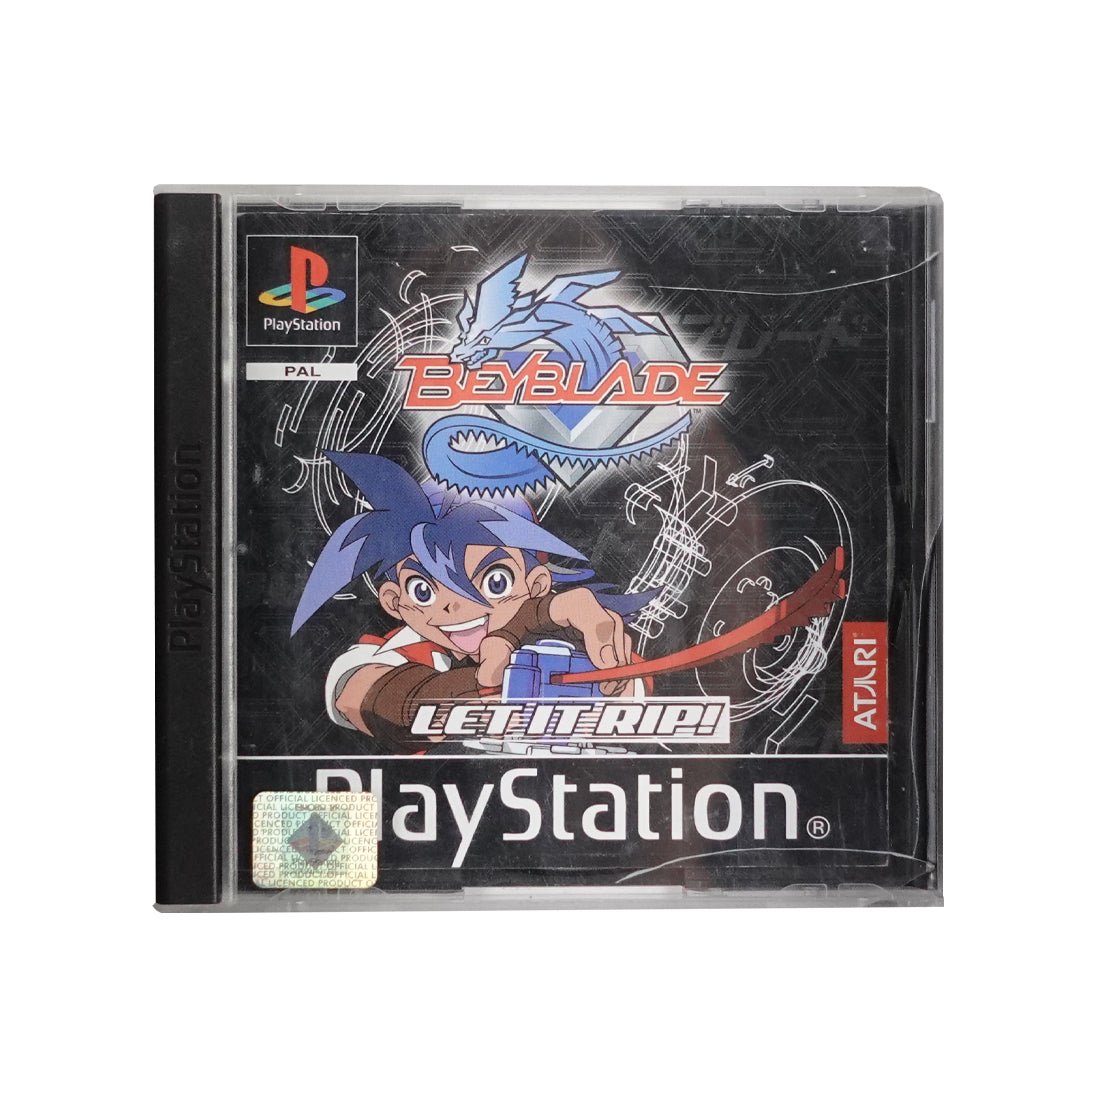 (Pre-Owned) Beyblade - PlayStation 1 - Store 974 | ستور ٩٧٤